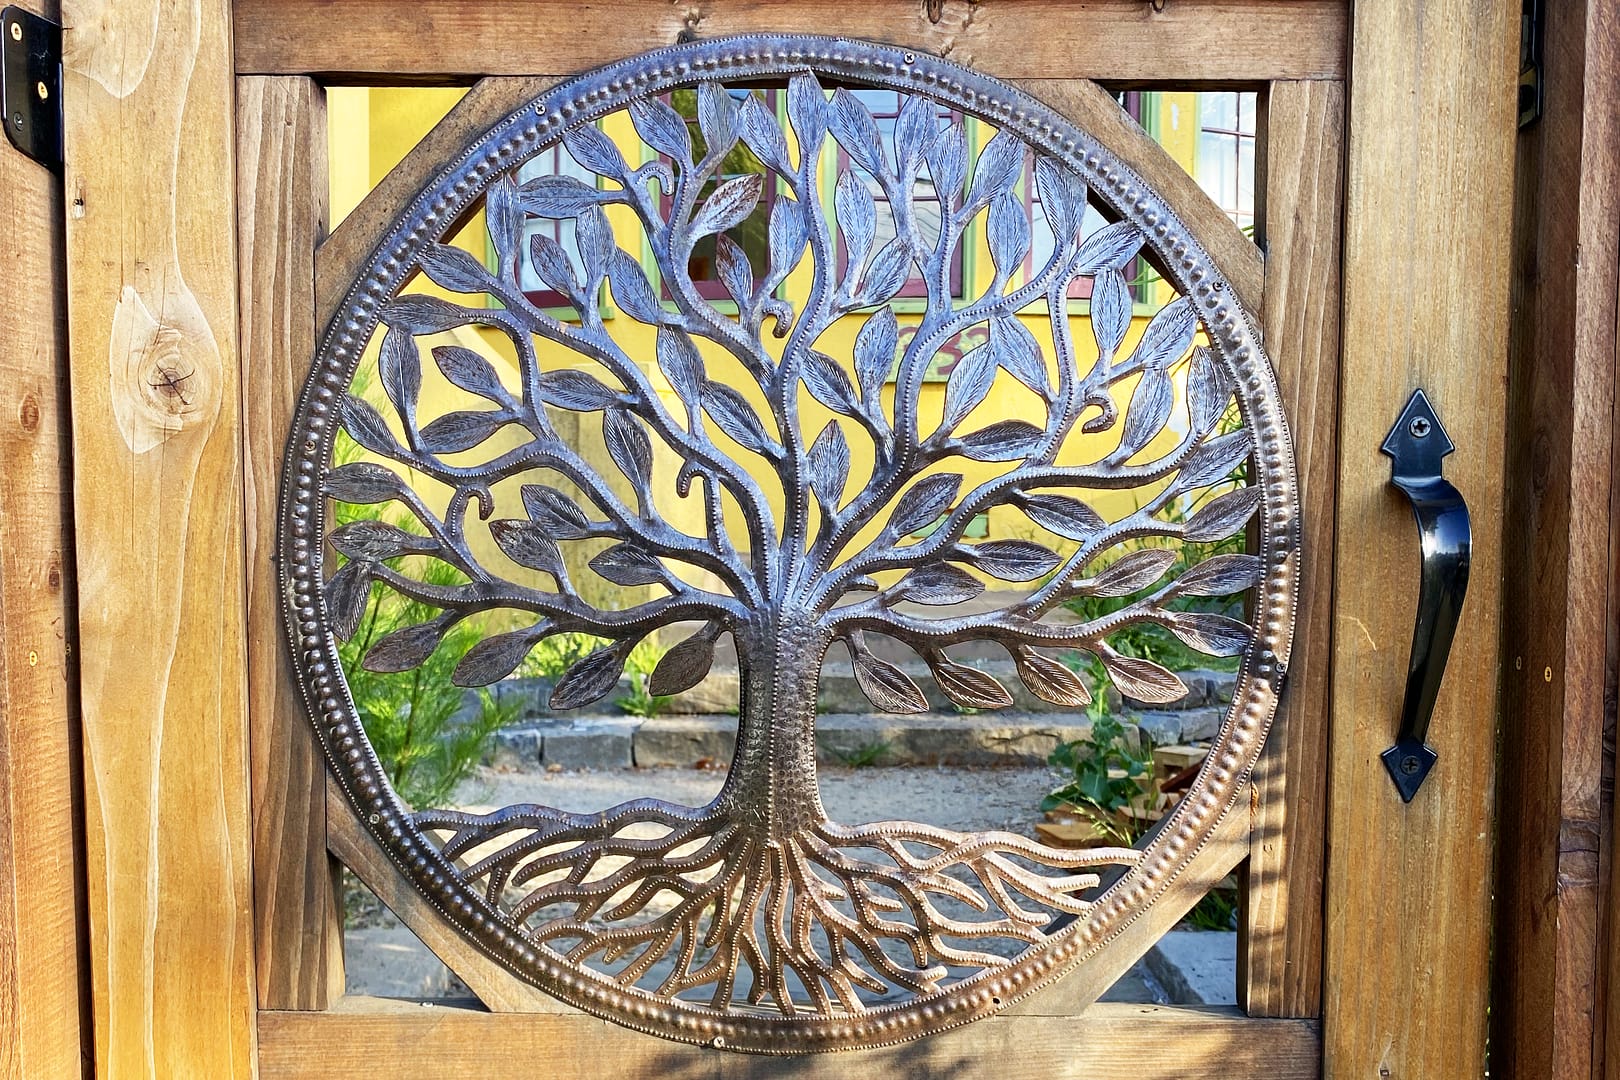 A depiction of the Tree of Life in metal inlaid in a wooden doorway